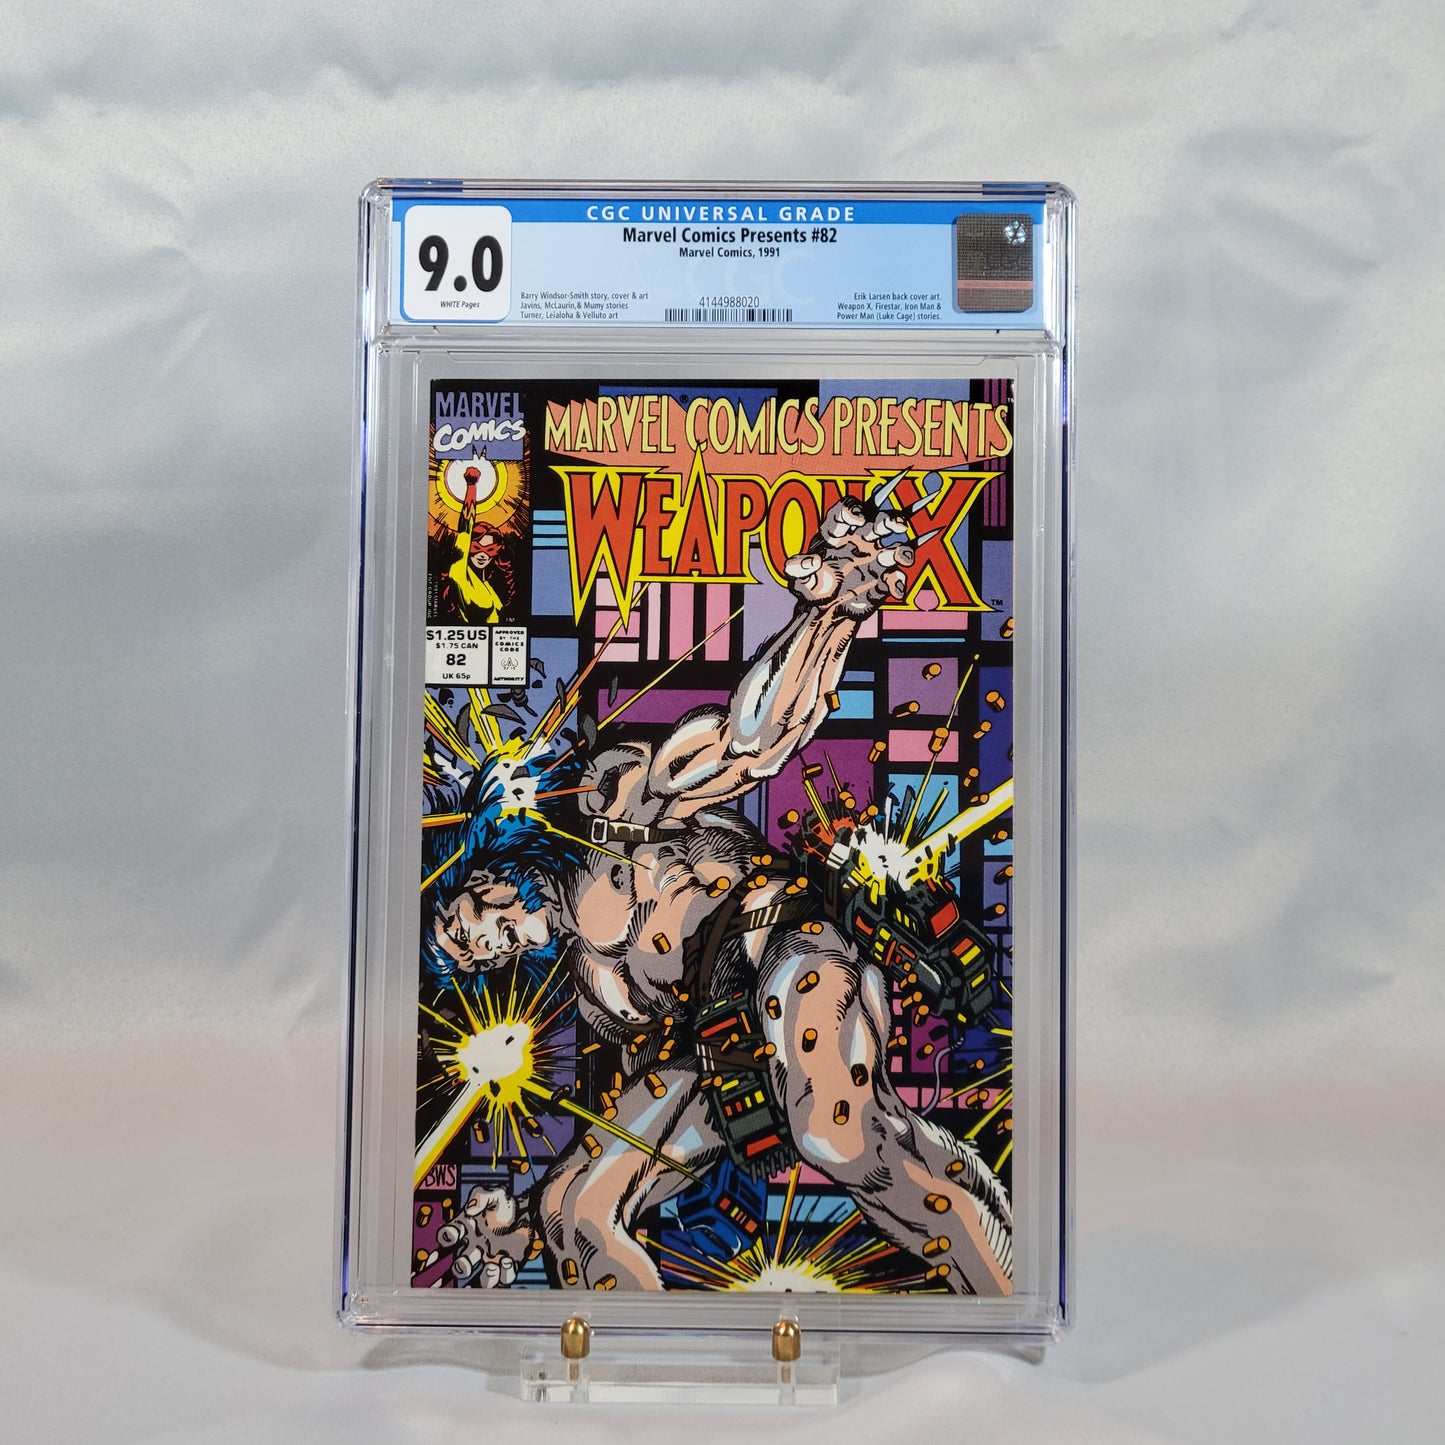 Marvel Comics Presents: Weapon X #72-84 Collection